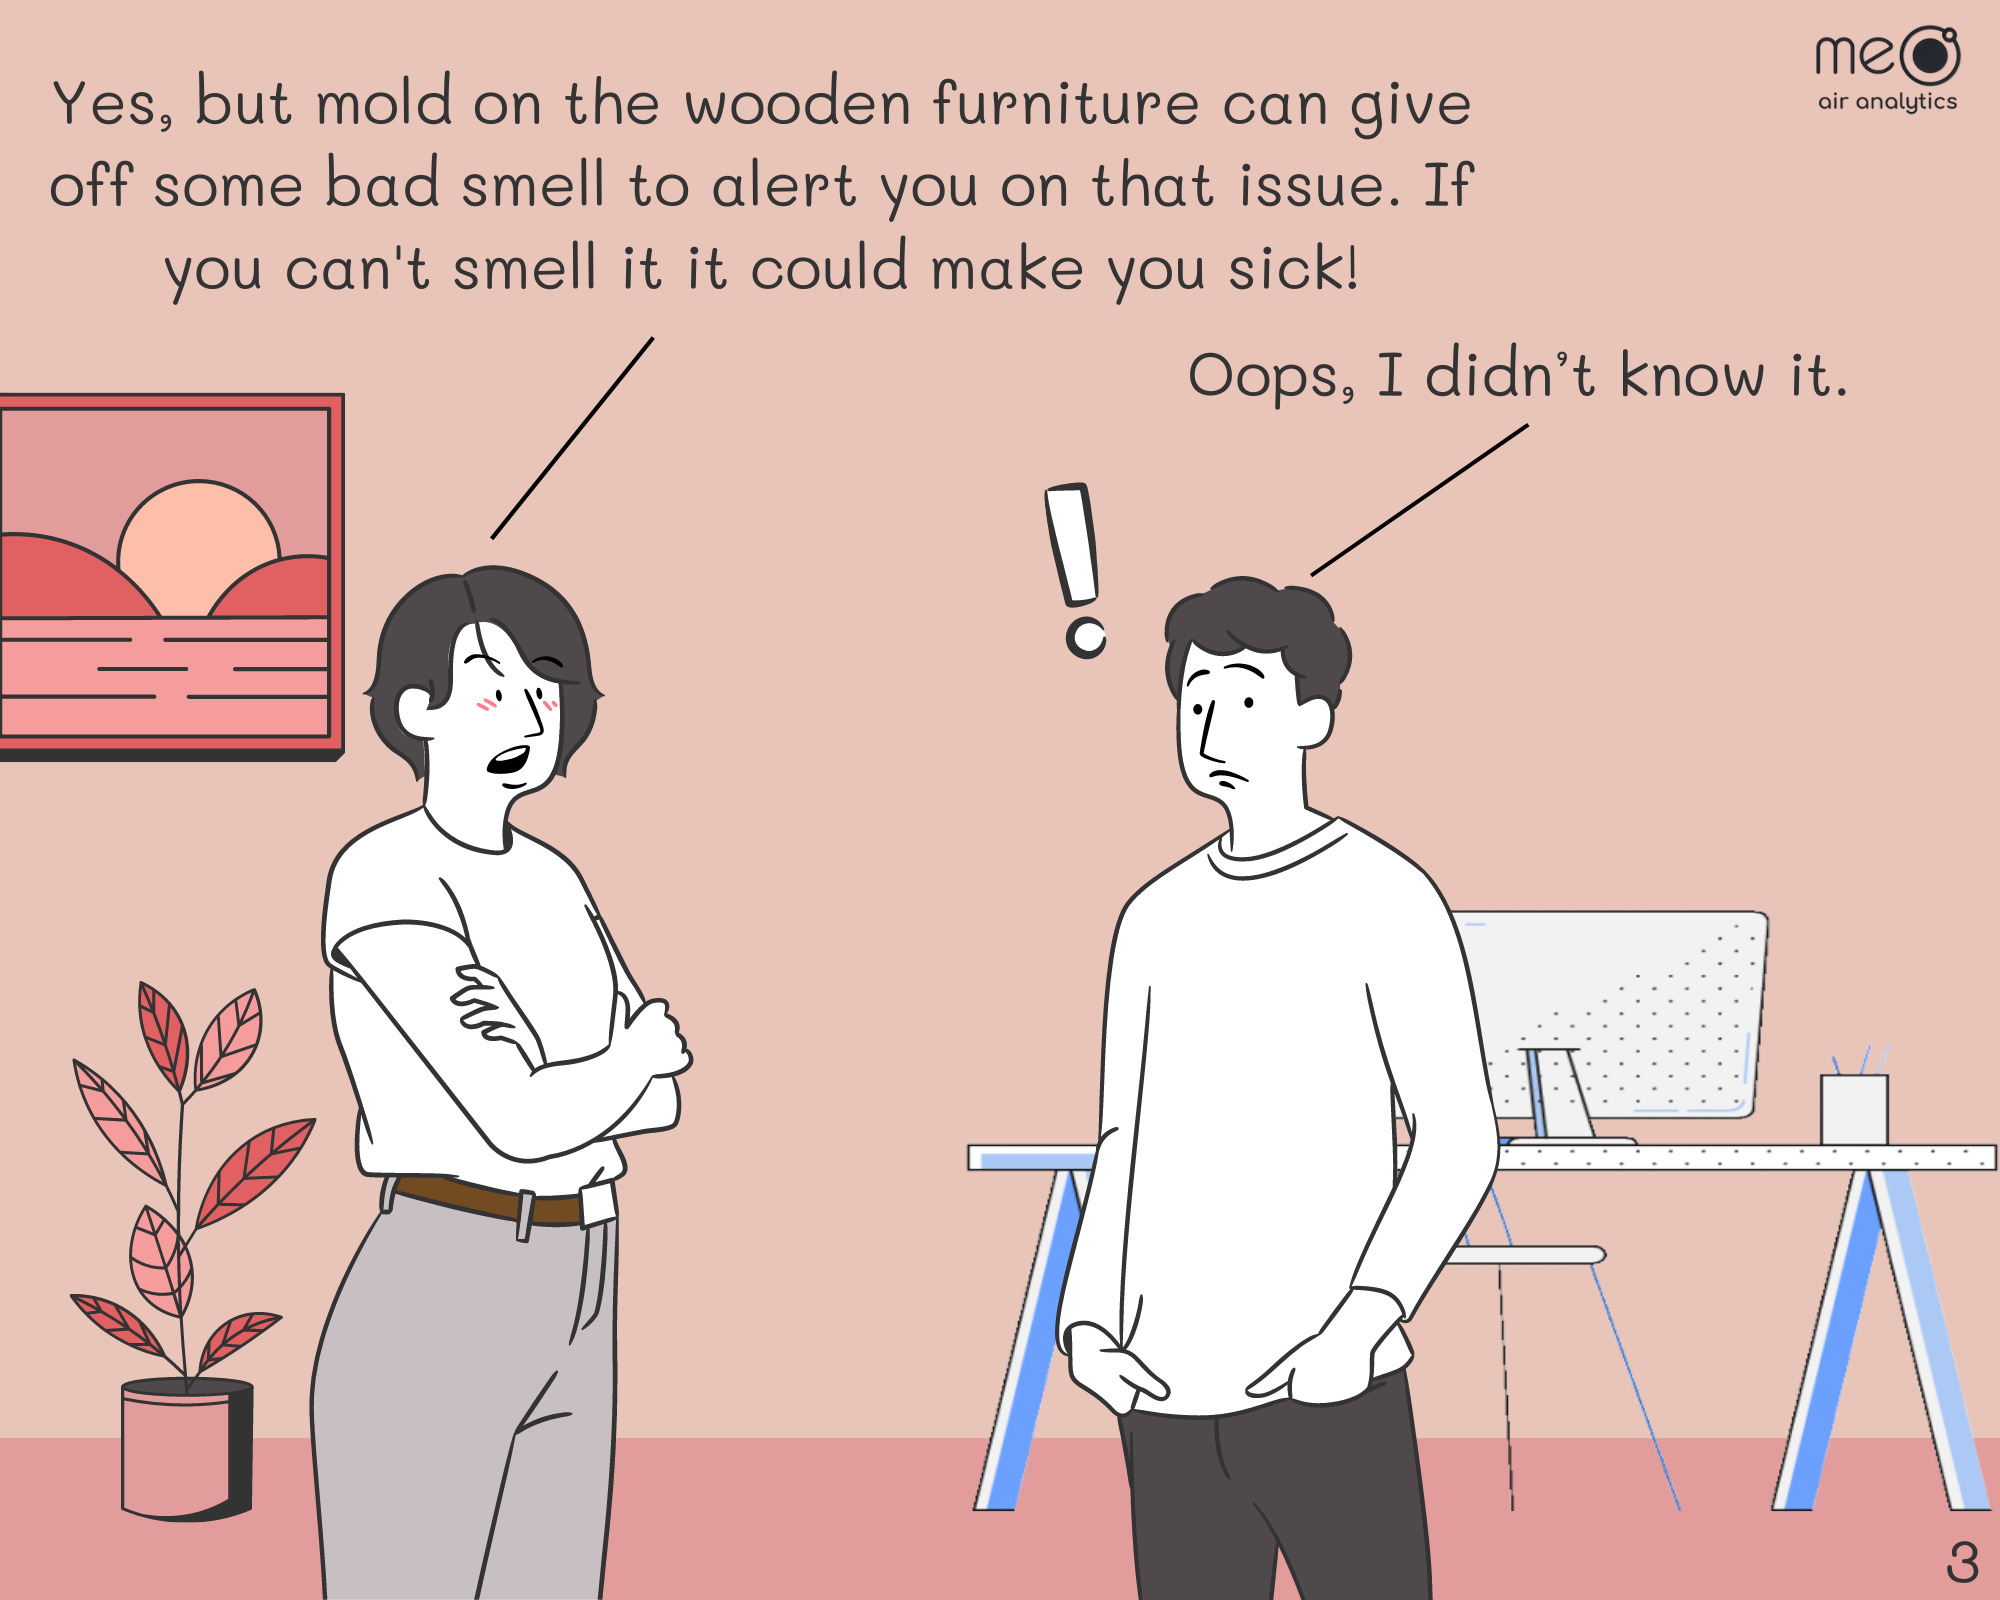 John: Yes, but mold on the wooden furniture can give off some bad smell. Covering the smell will just let the mold grow and at the end make you sick!
Derek: Oops, I didn’t know it. Let’s do it now!!!!